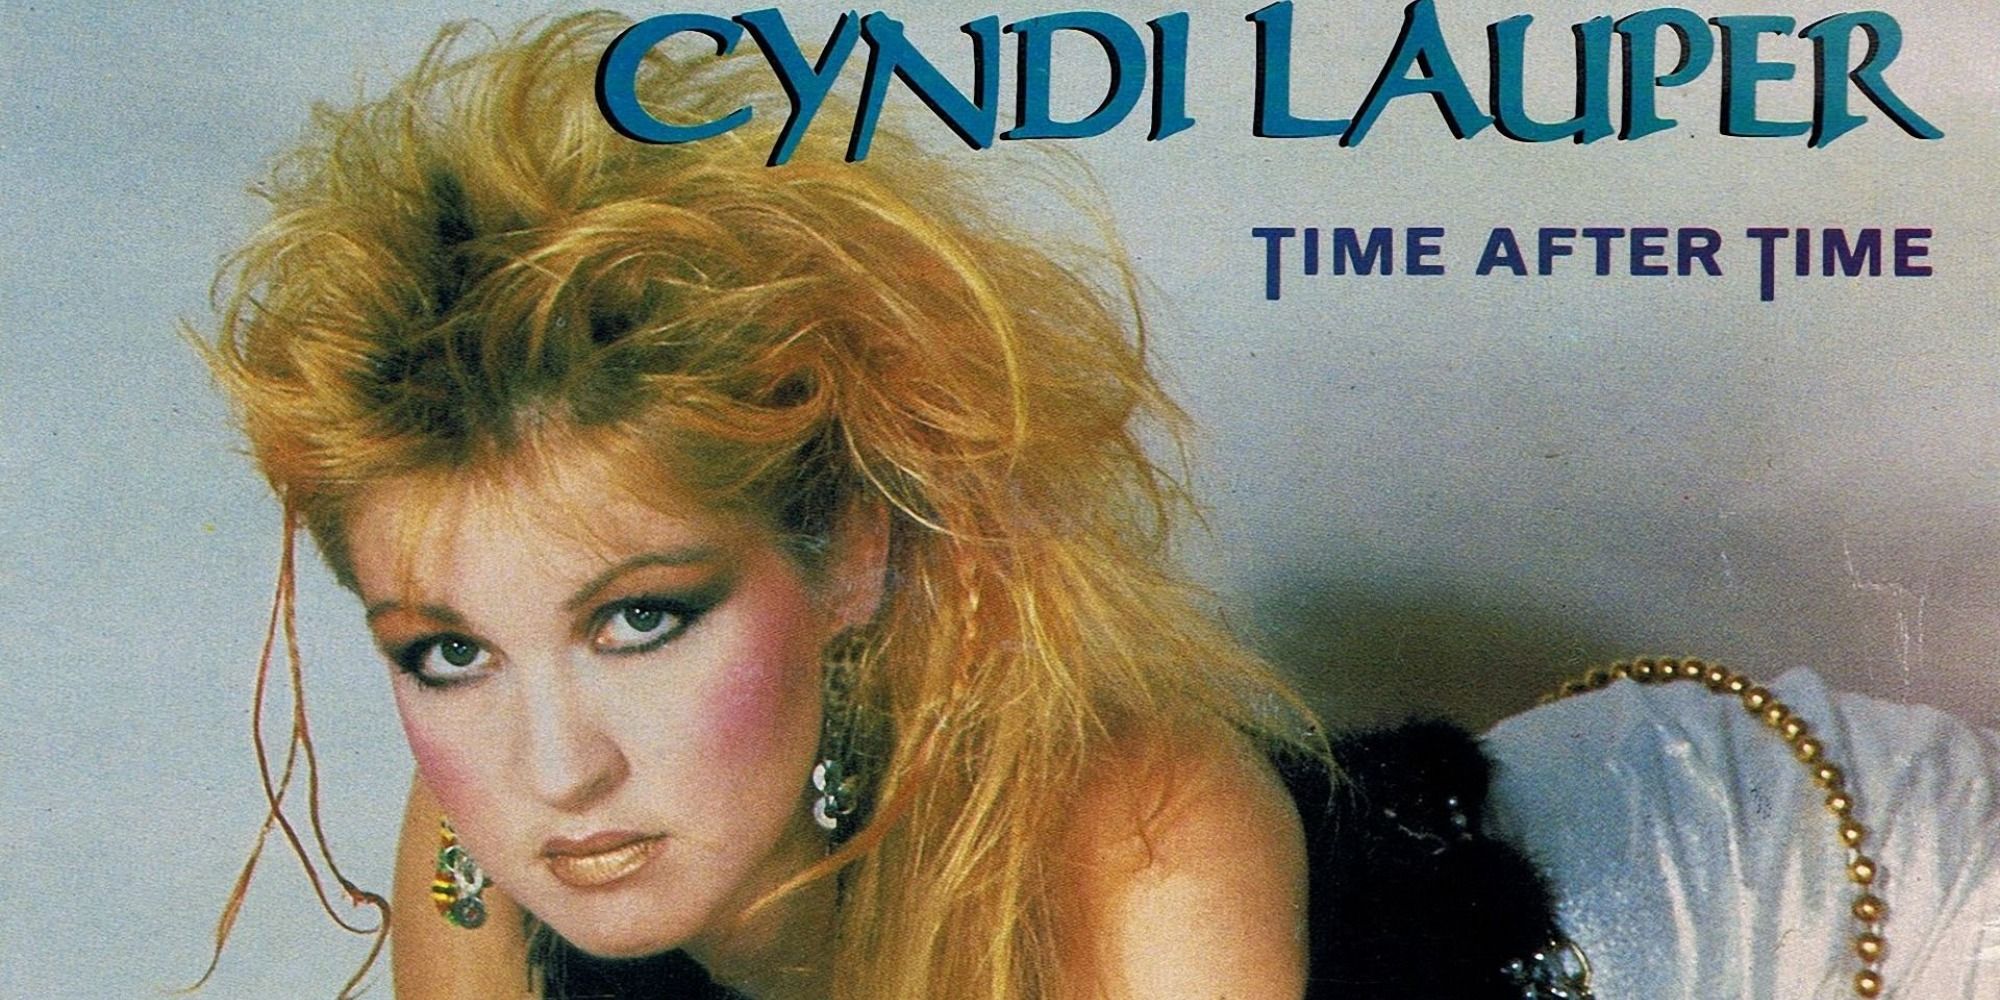 "Time After Time" by Cyndi Lauper album cover with her staring directly at you 